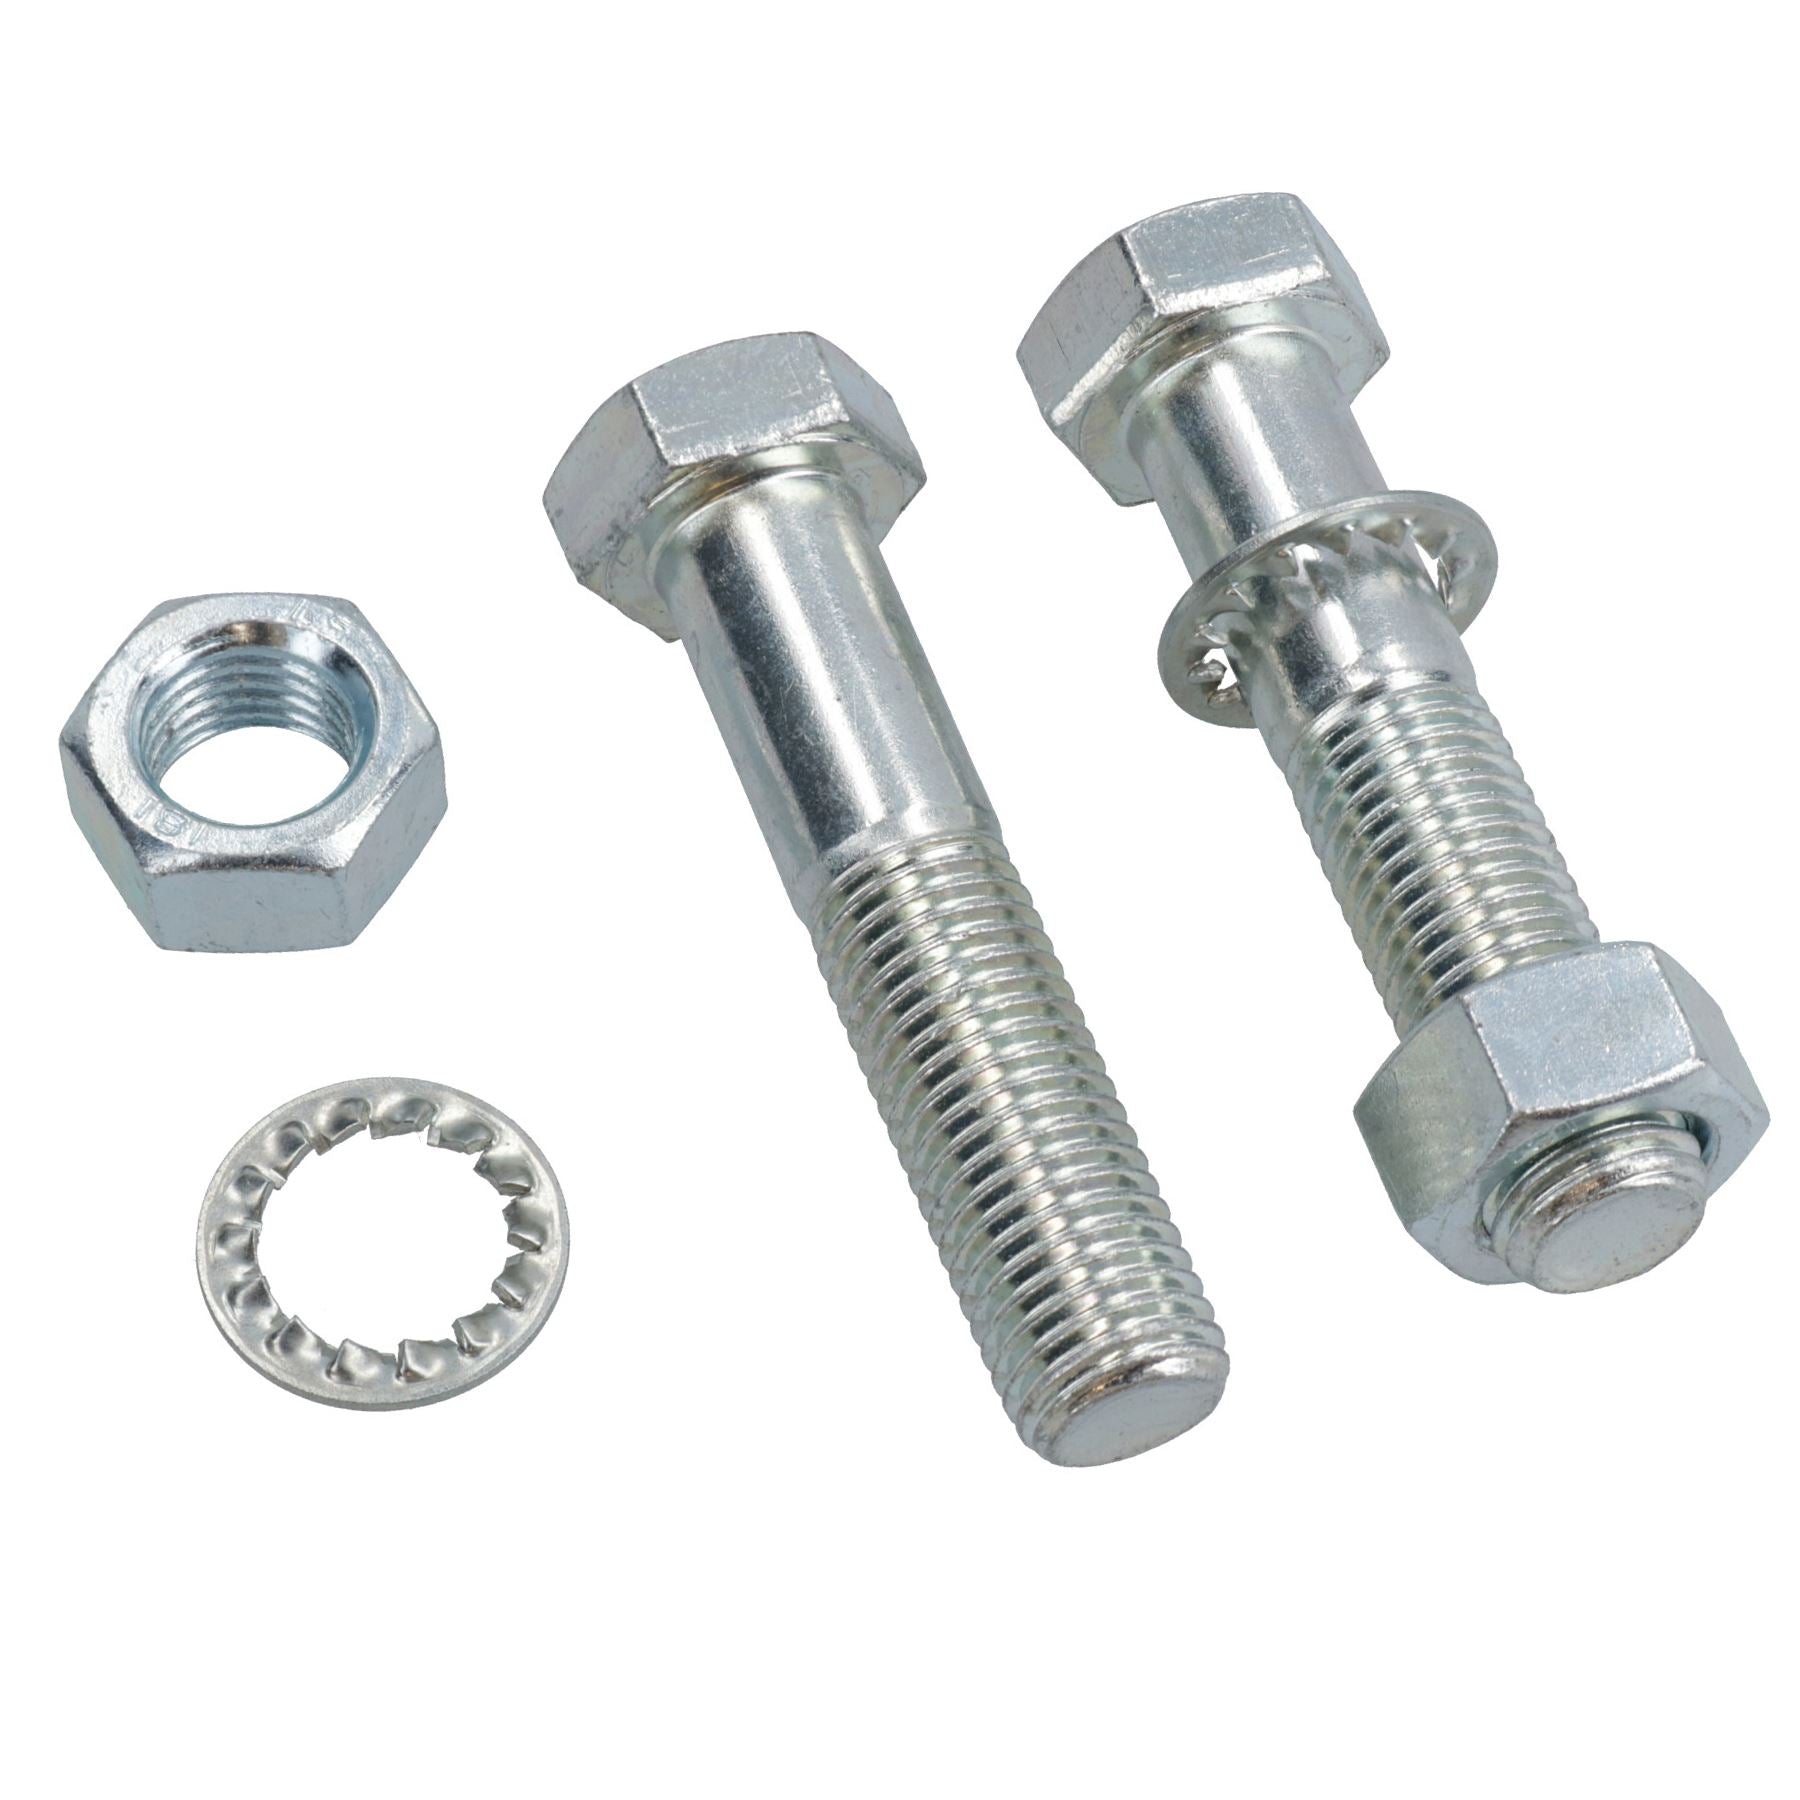 M16 (16mm) x 75mm High Tensile Tow Bar Ball Fixing Bolts Washers + Nuts